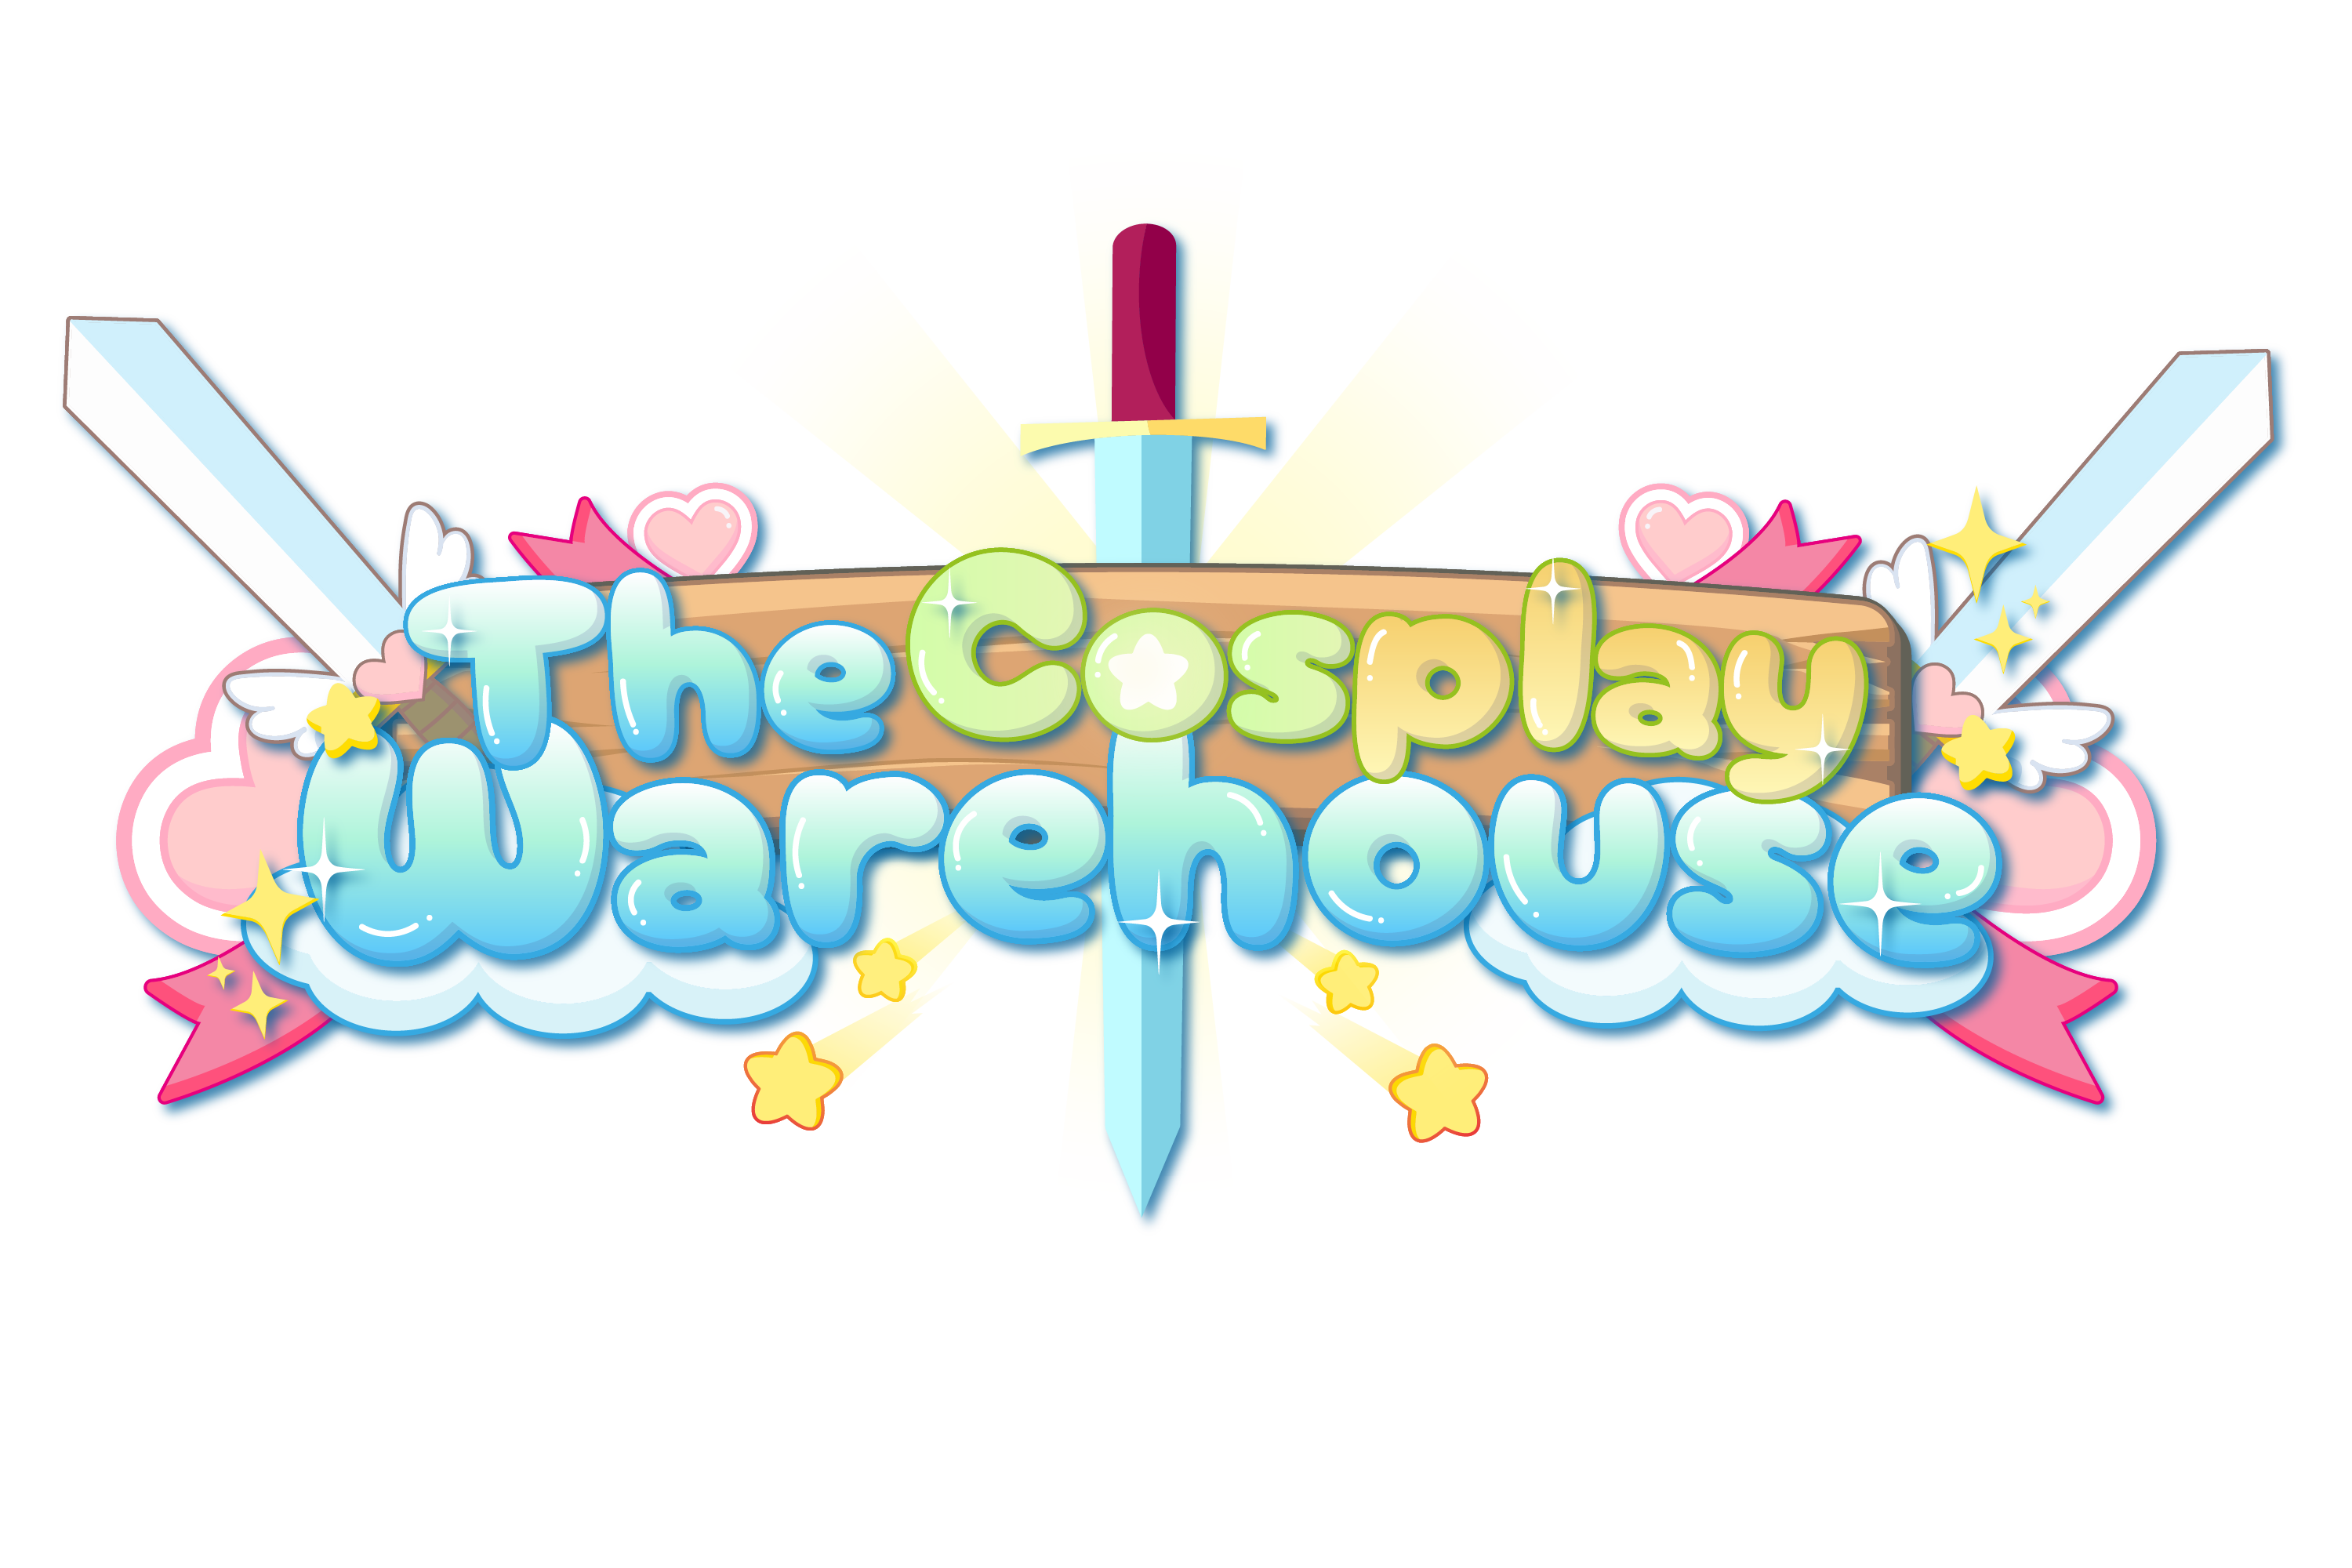 The Cosplay Warehouse